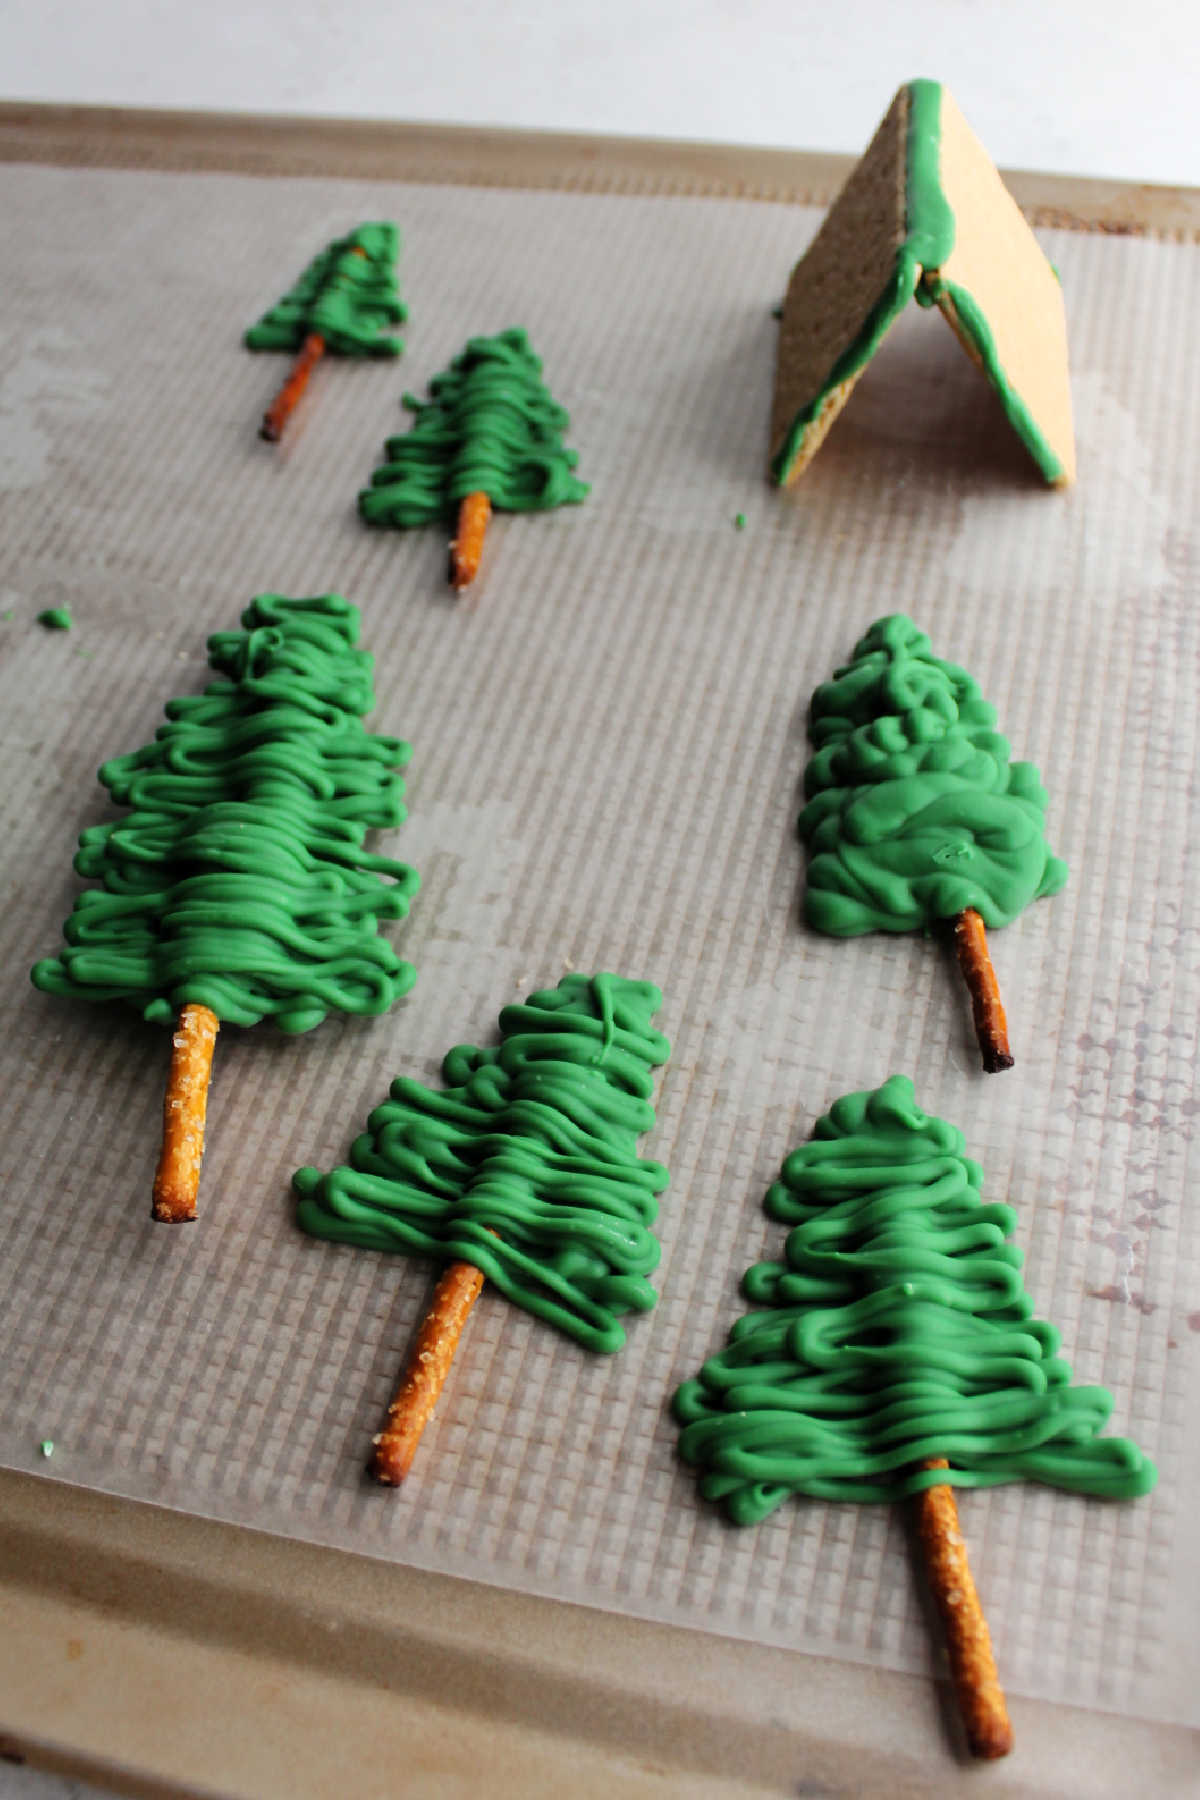 Making trees out of pretzels and green chocolate